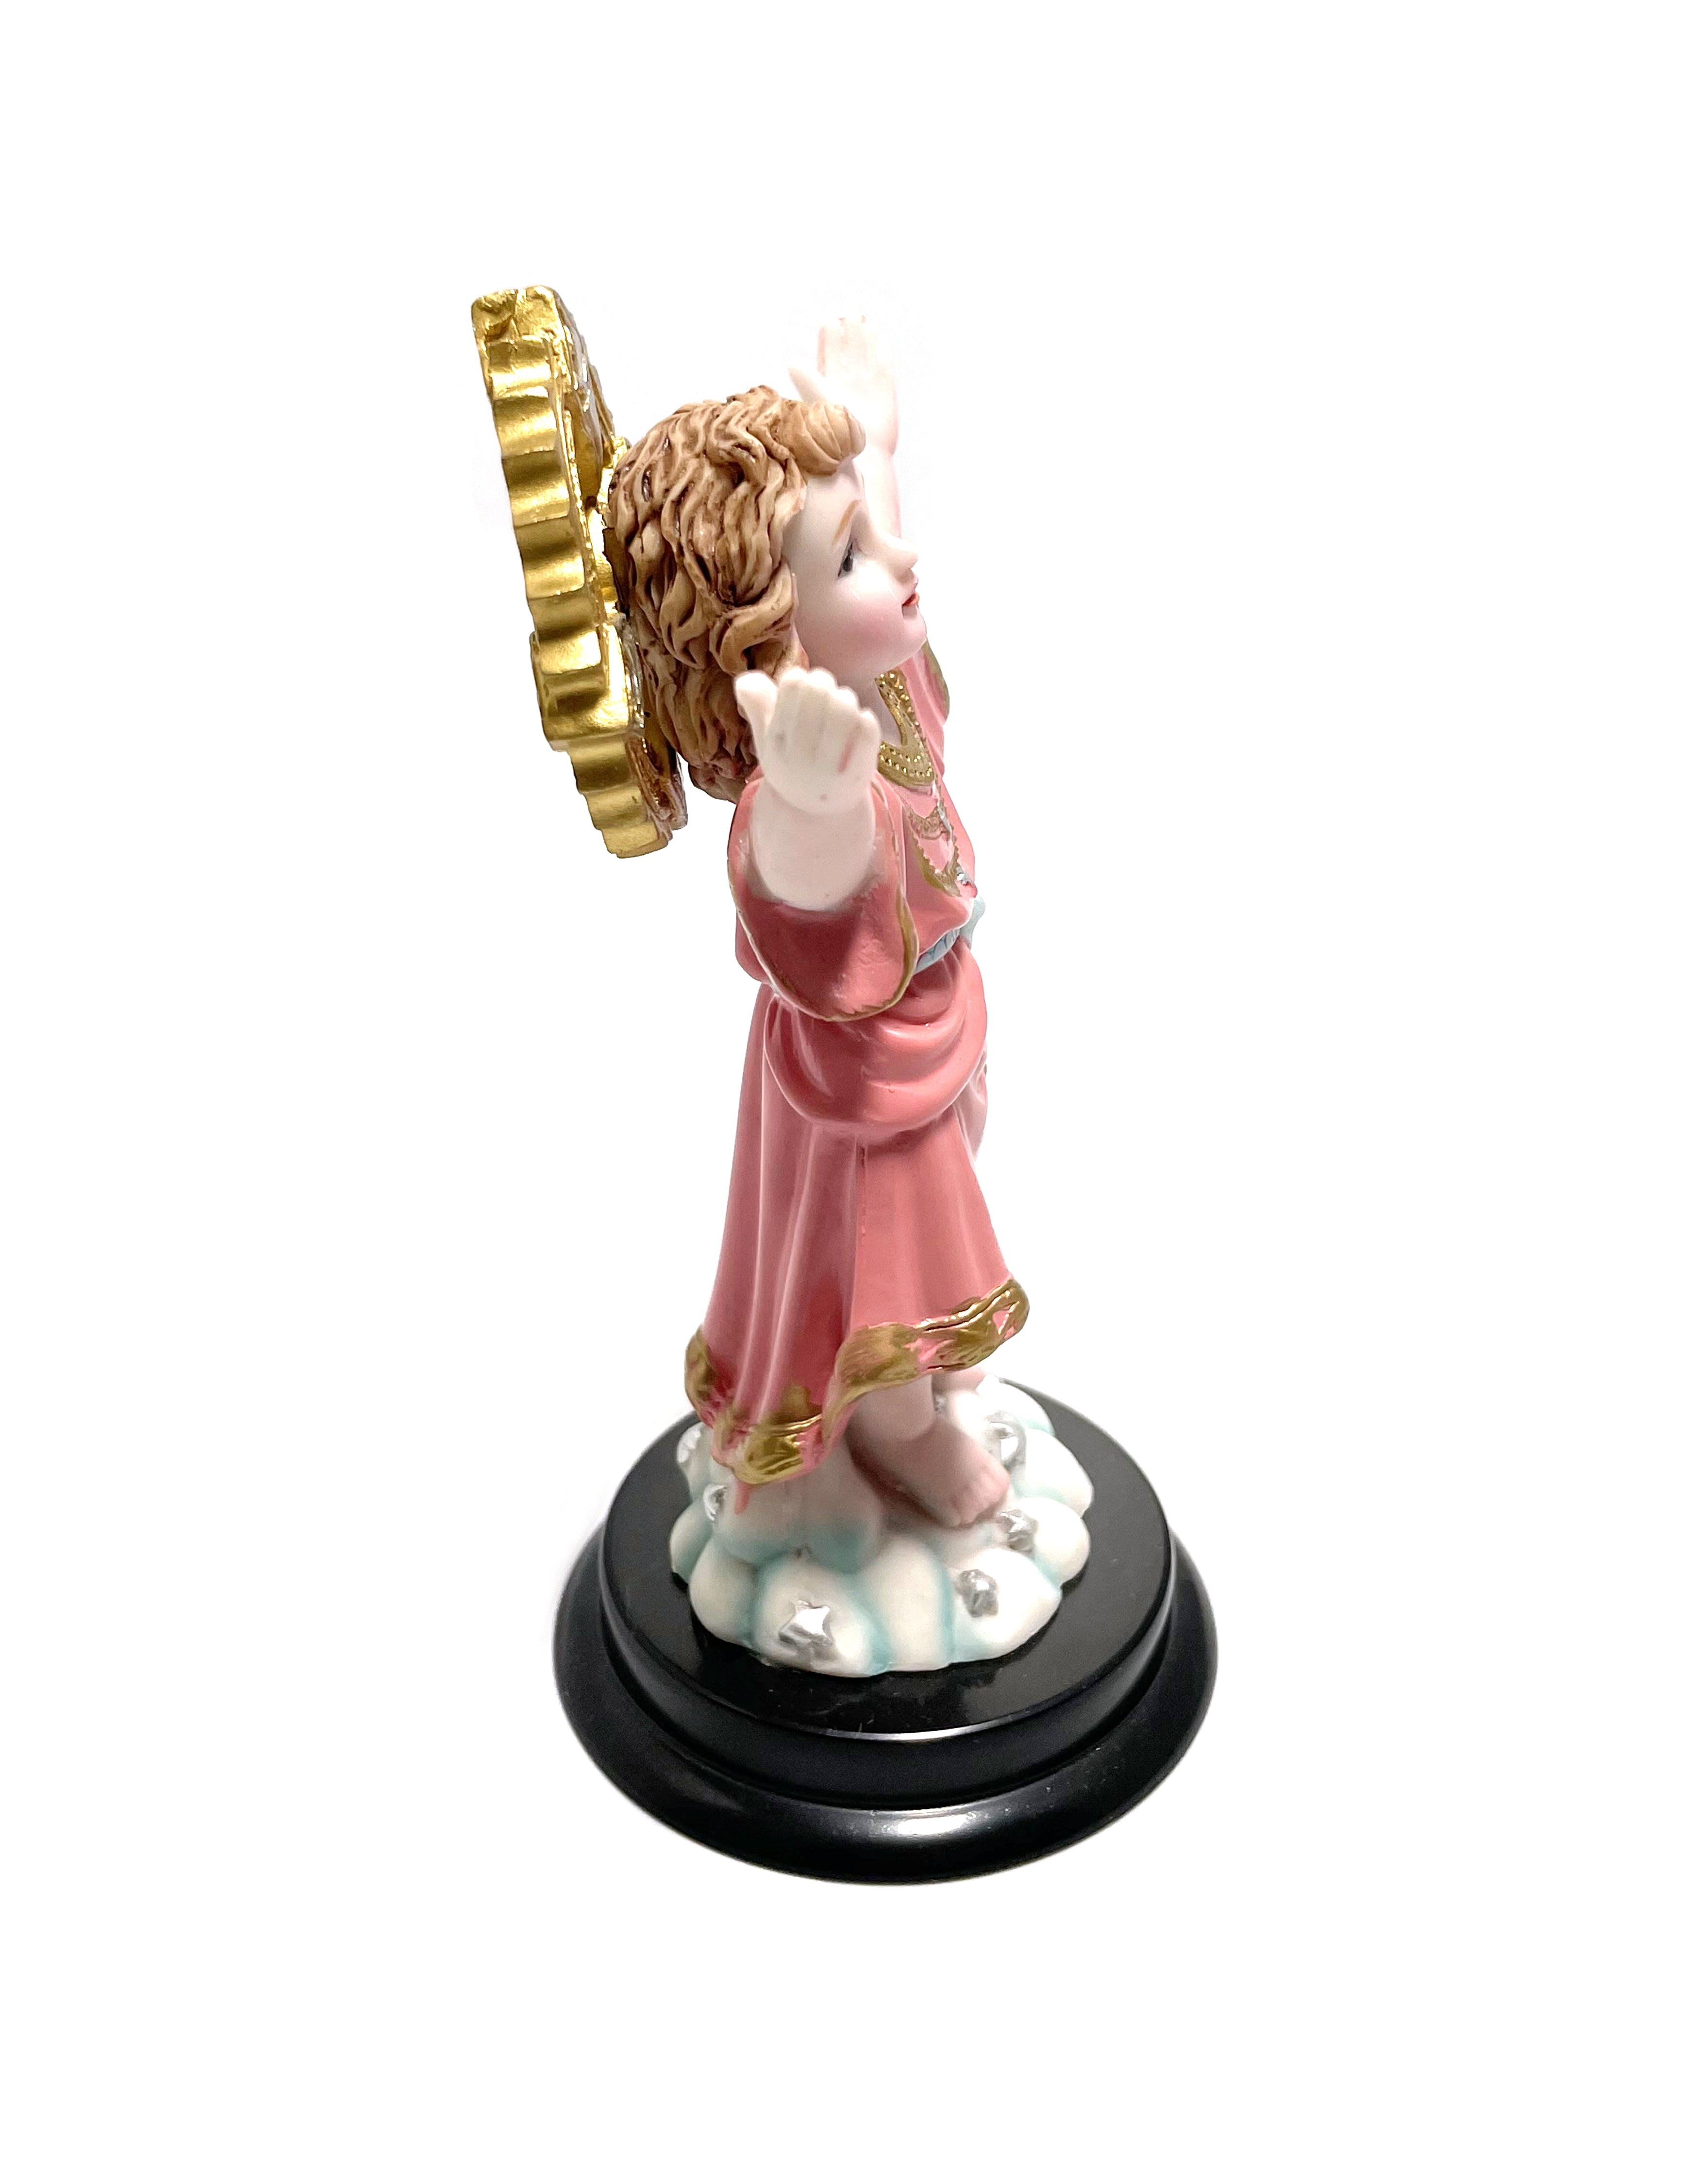 Religious statue of the Divine Child 5" height